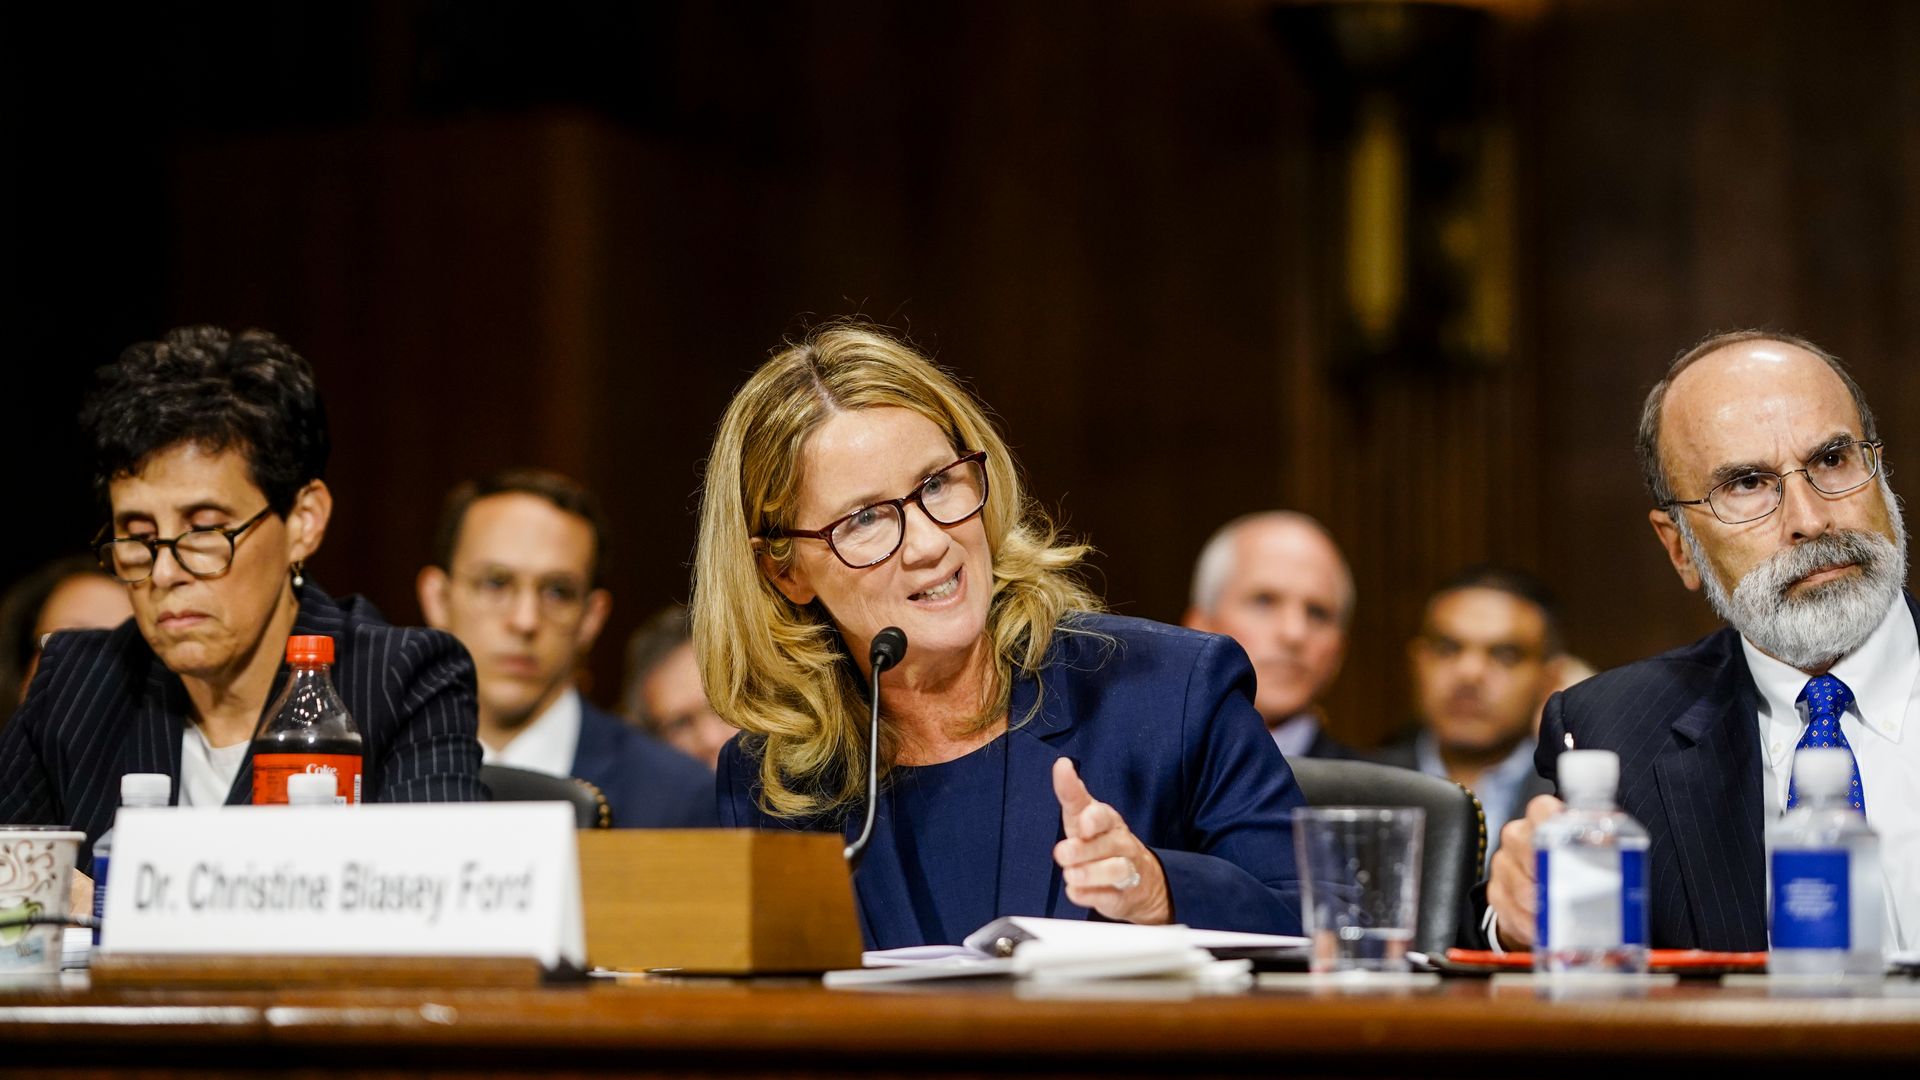 Christine Blasey Ford sitting at a table during the senate hearing.